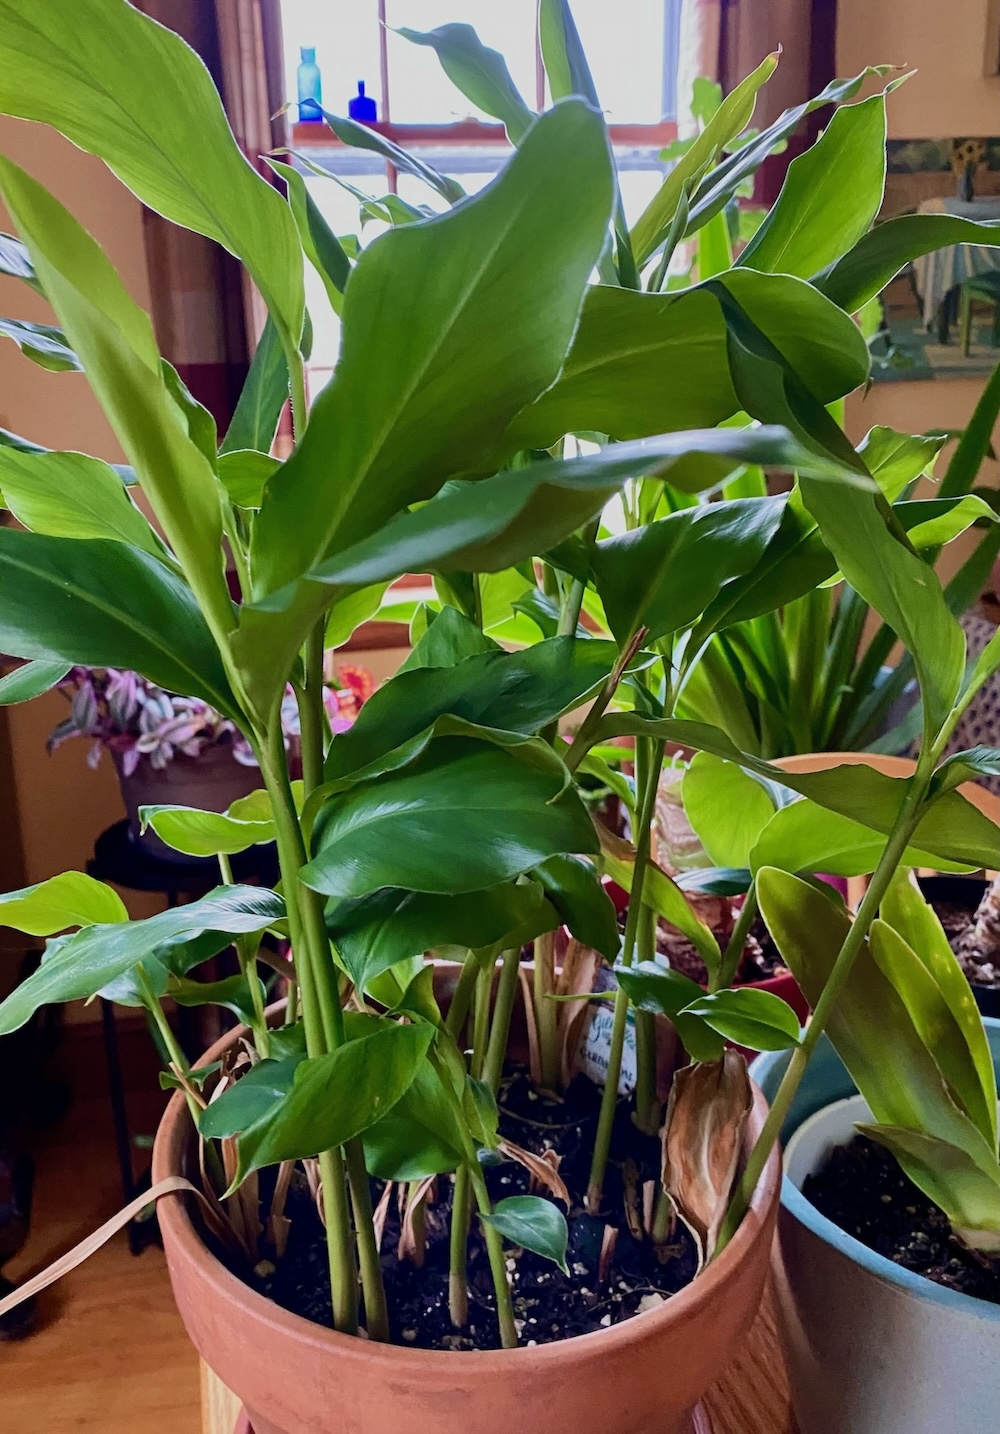 My Cardamom Plant with Other Plants